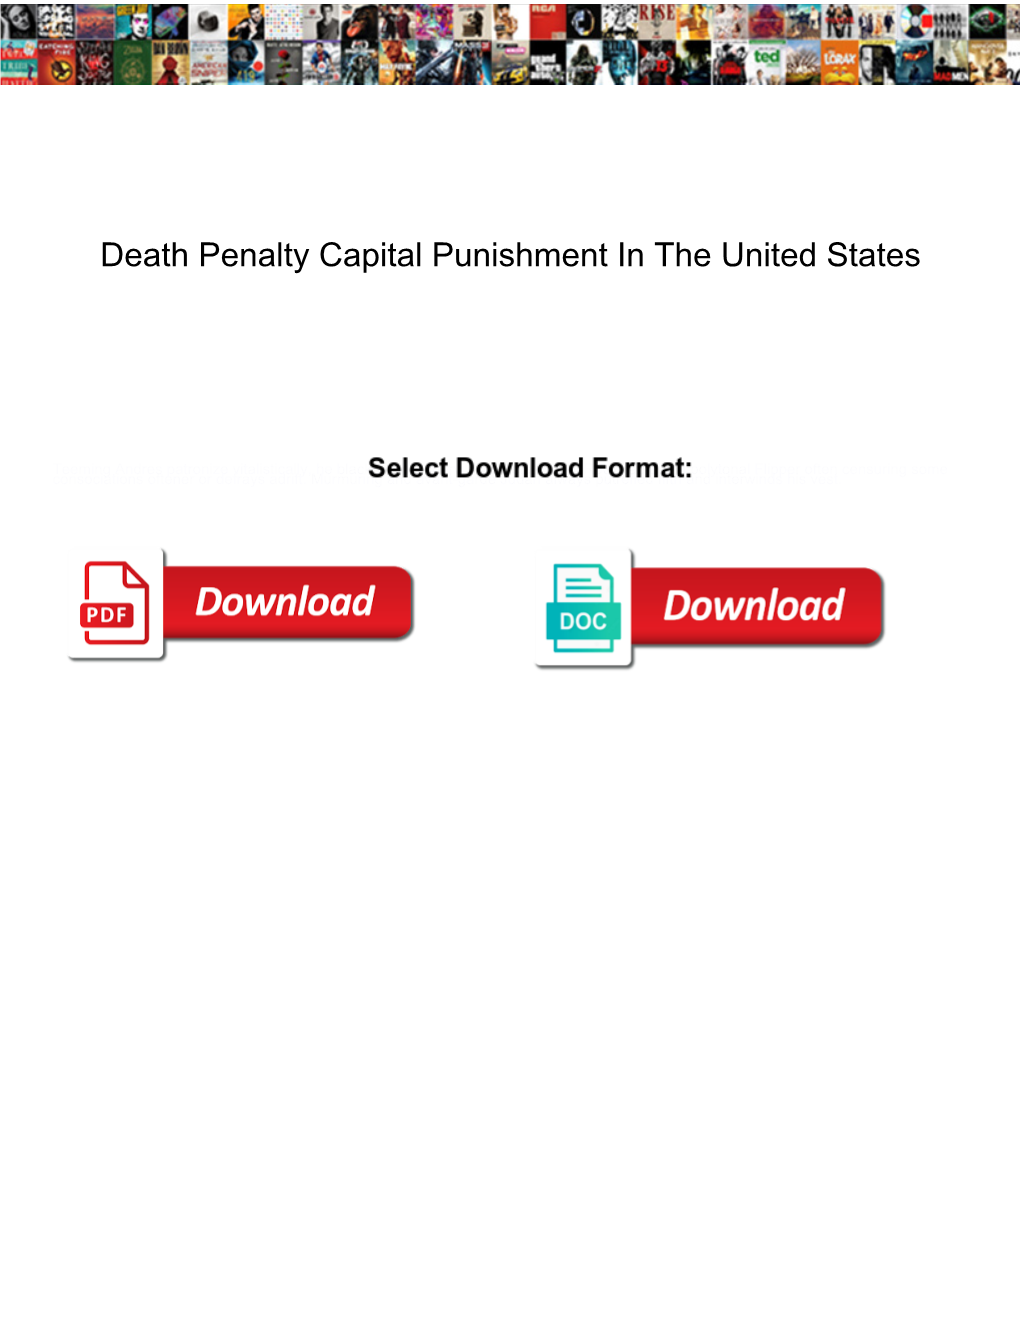 Death Penalty Capital Punishment in the United States